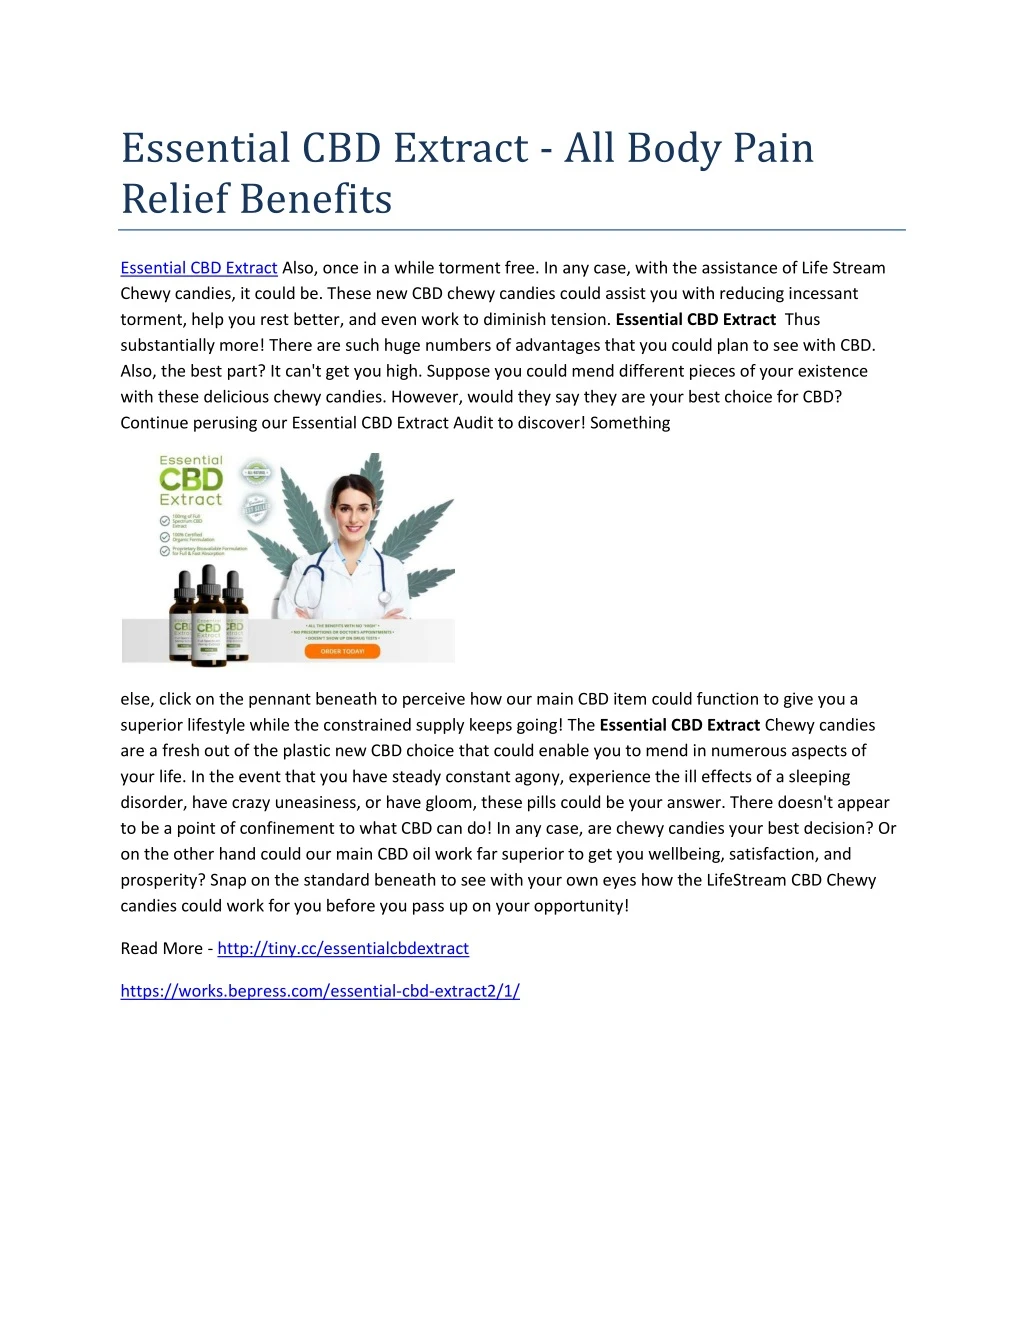 essential cbd extract all body pain relief